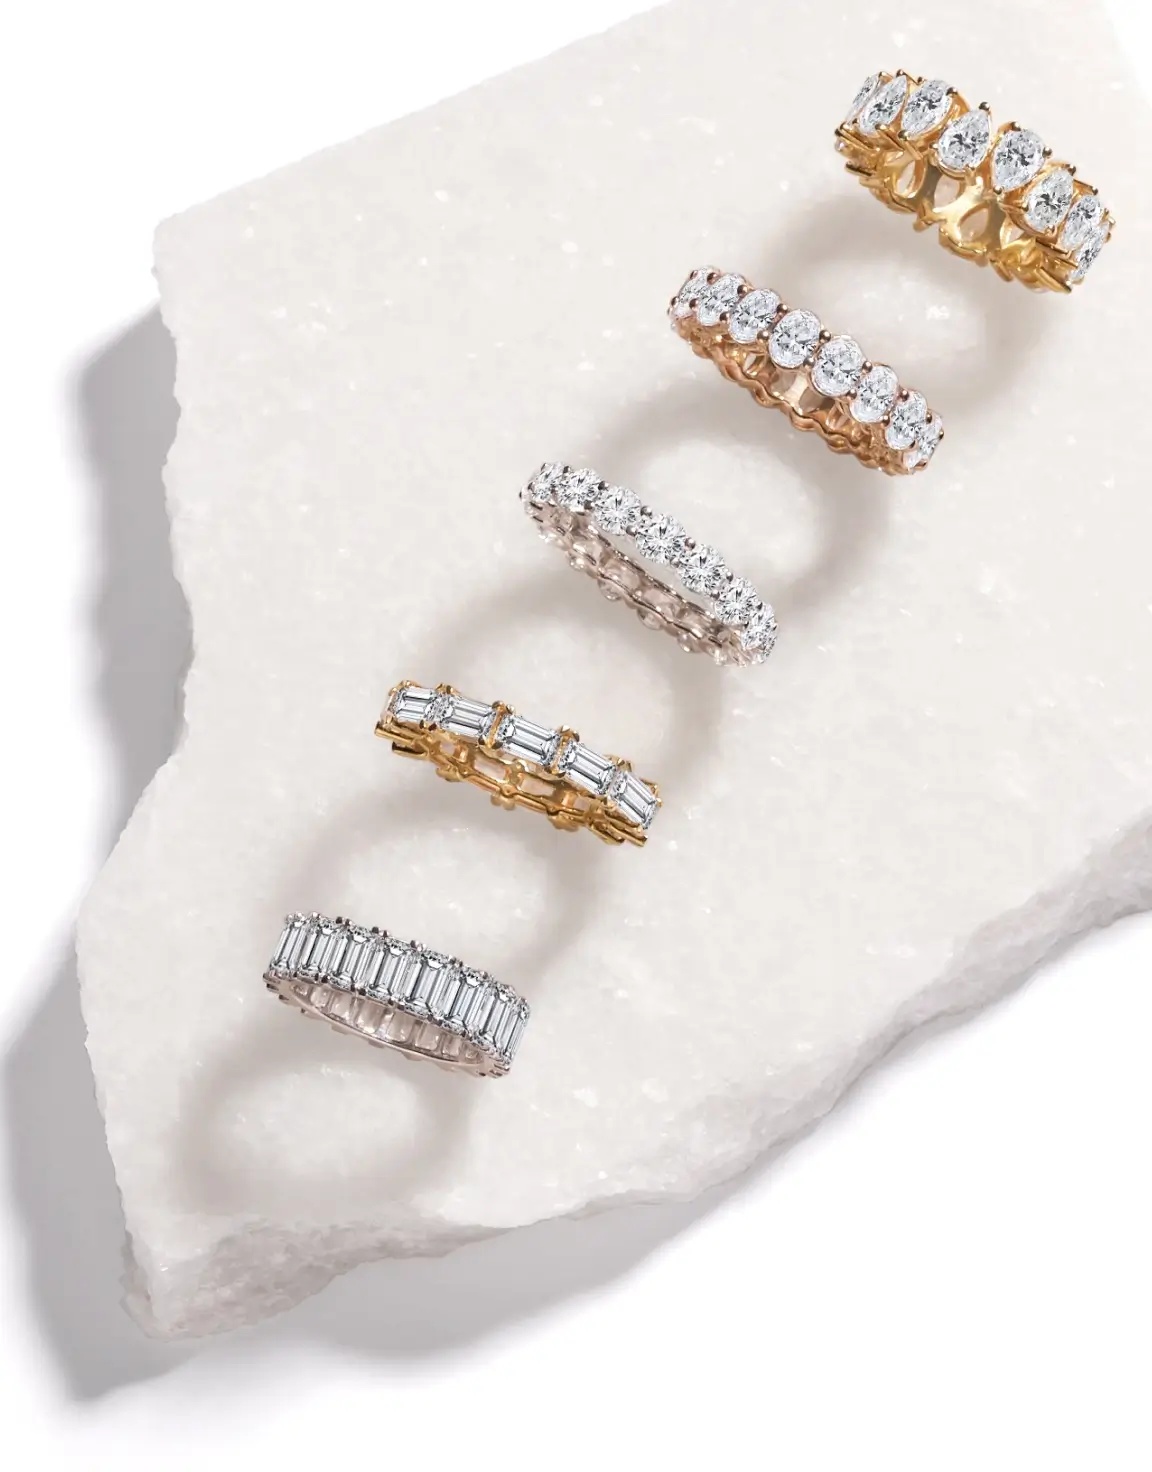 Unique Anniversary Rings: Celebrating Your Love with Distinctive Style